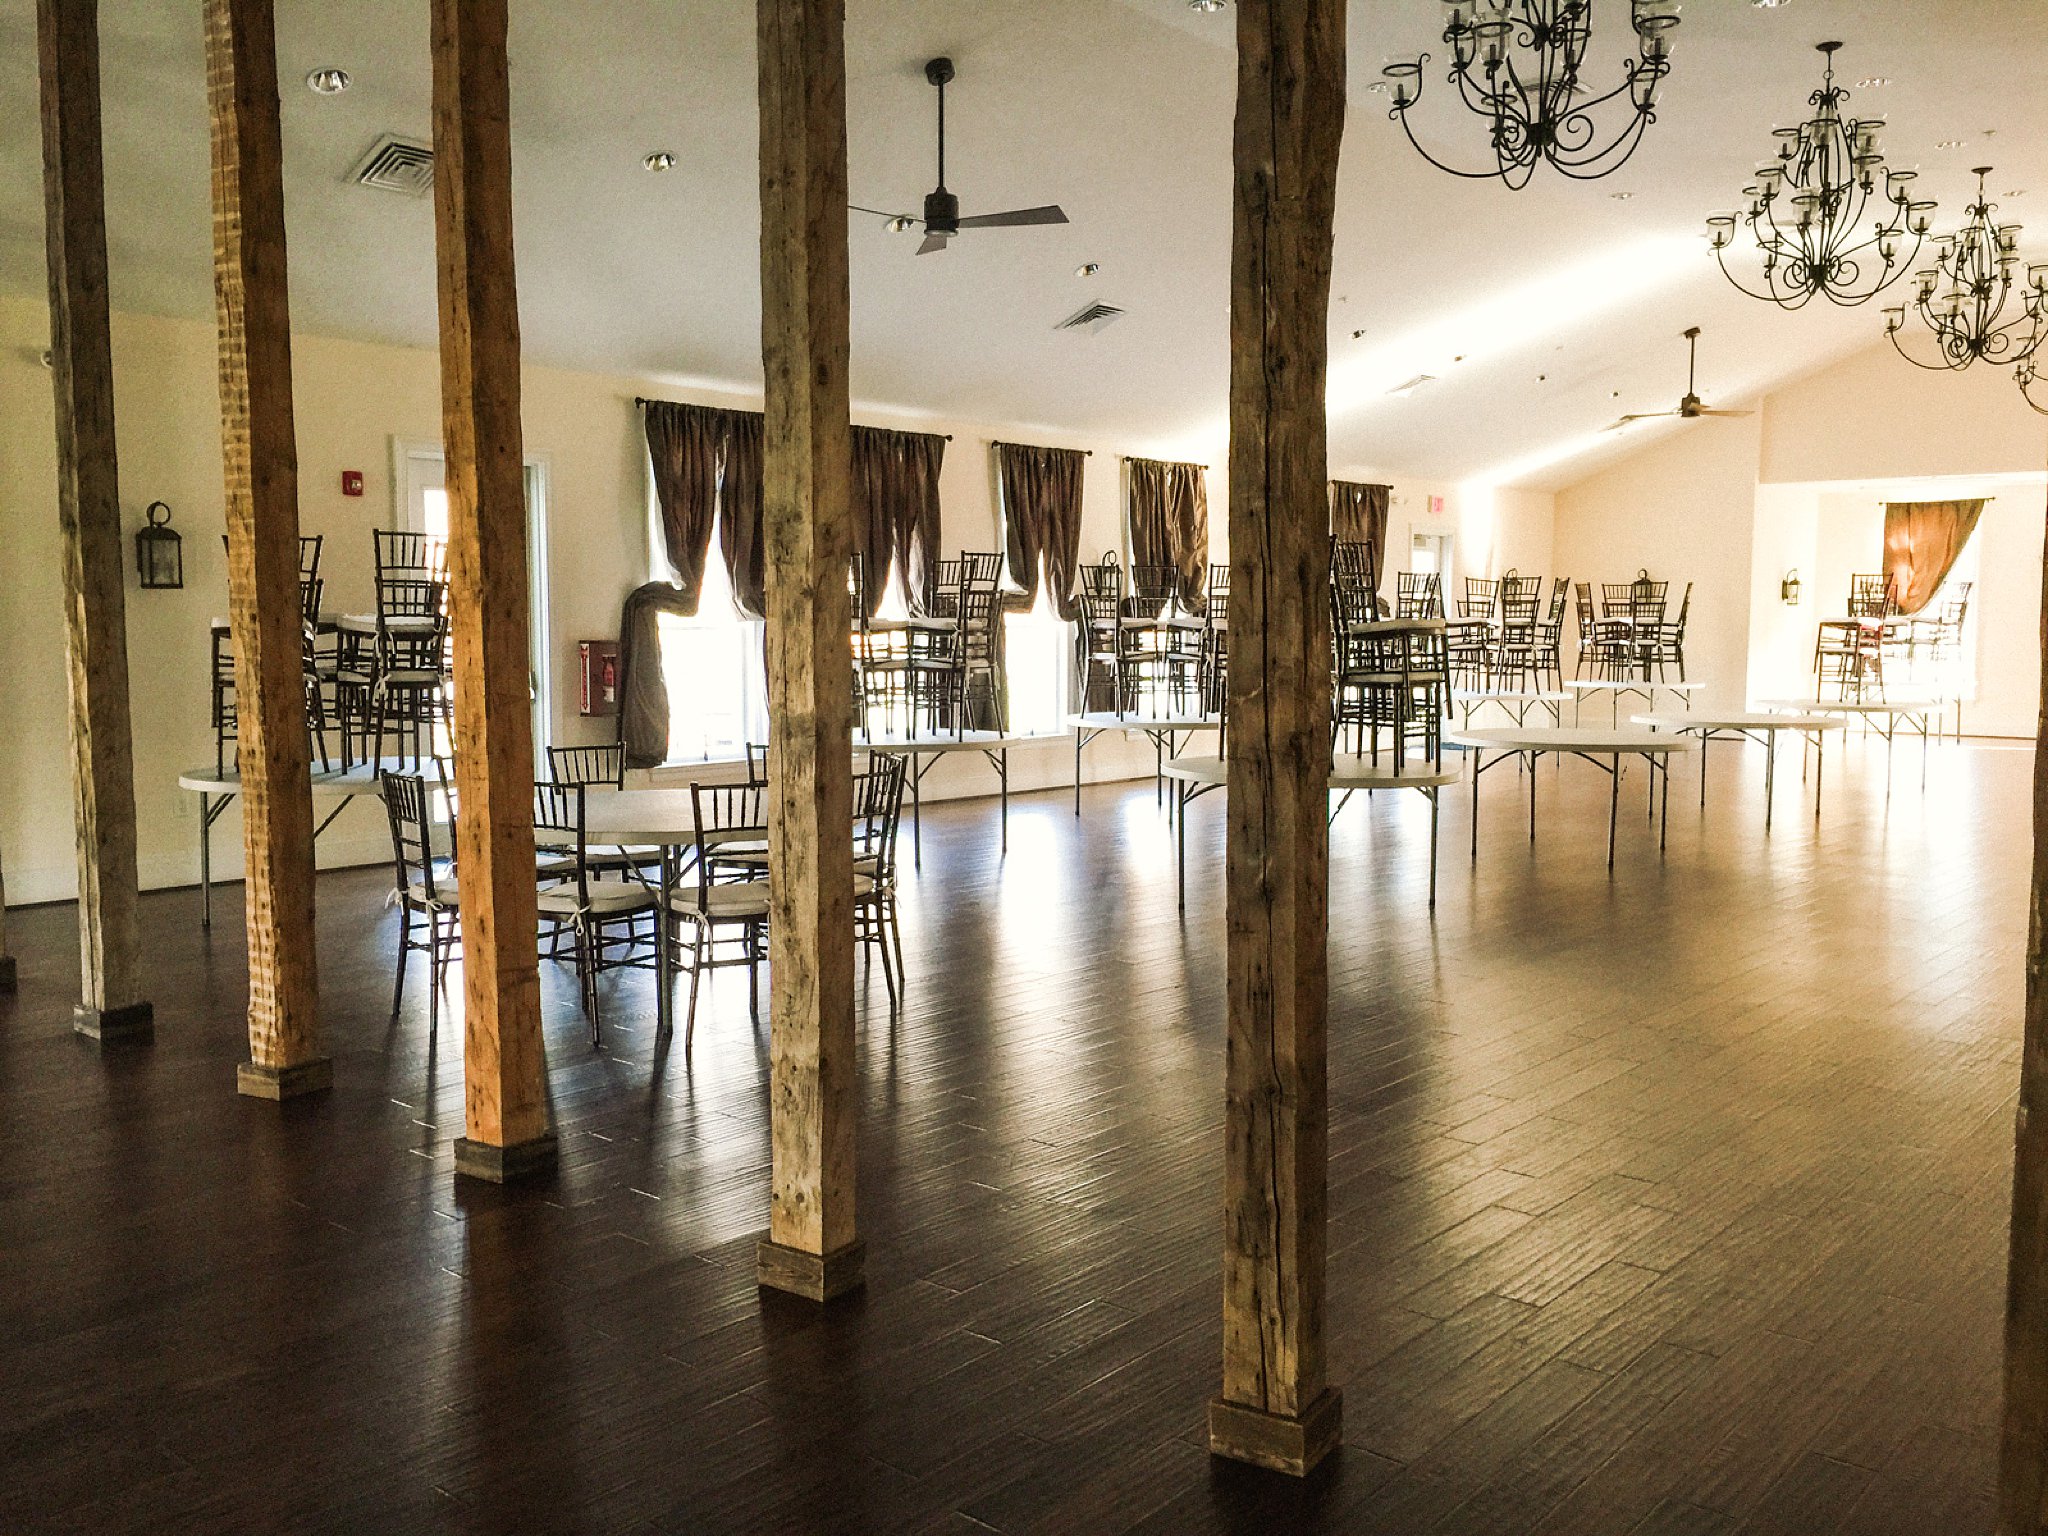 Tips For Finding Your Wedding Venue